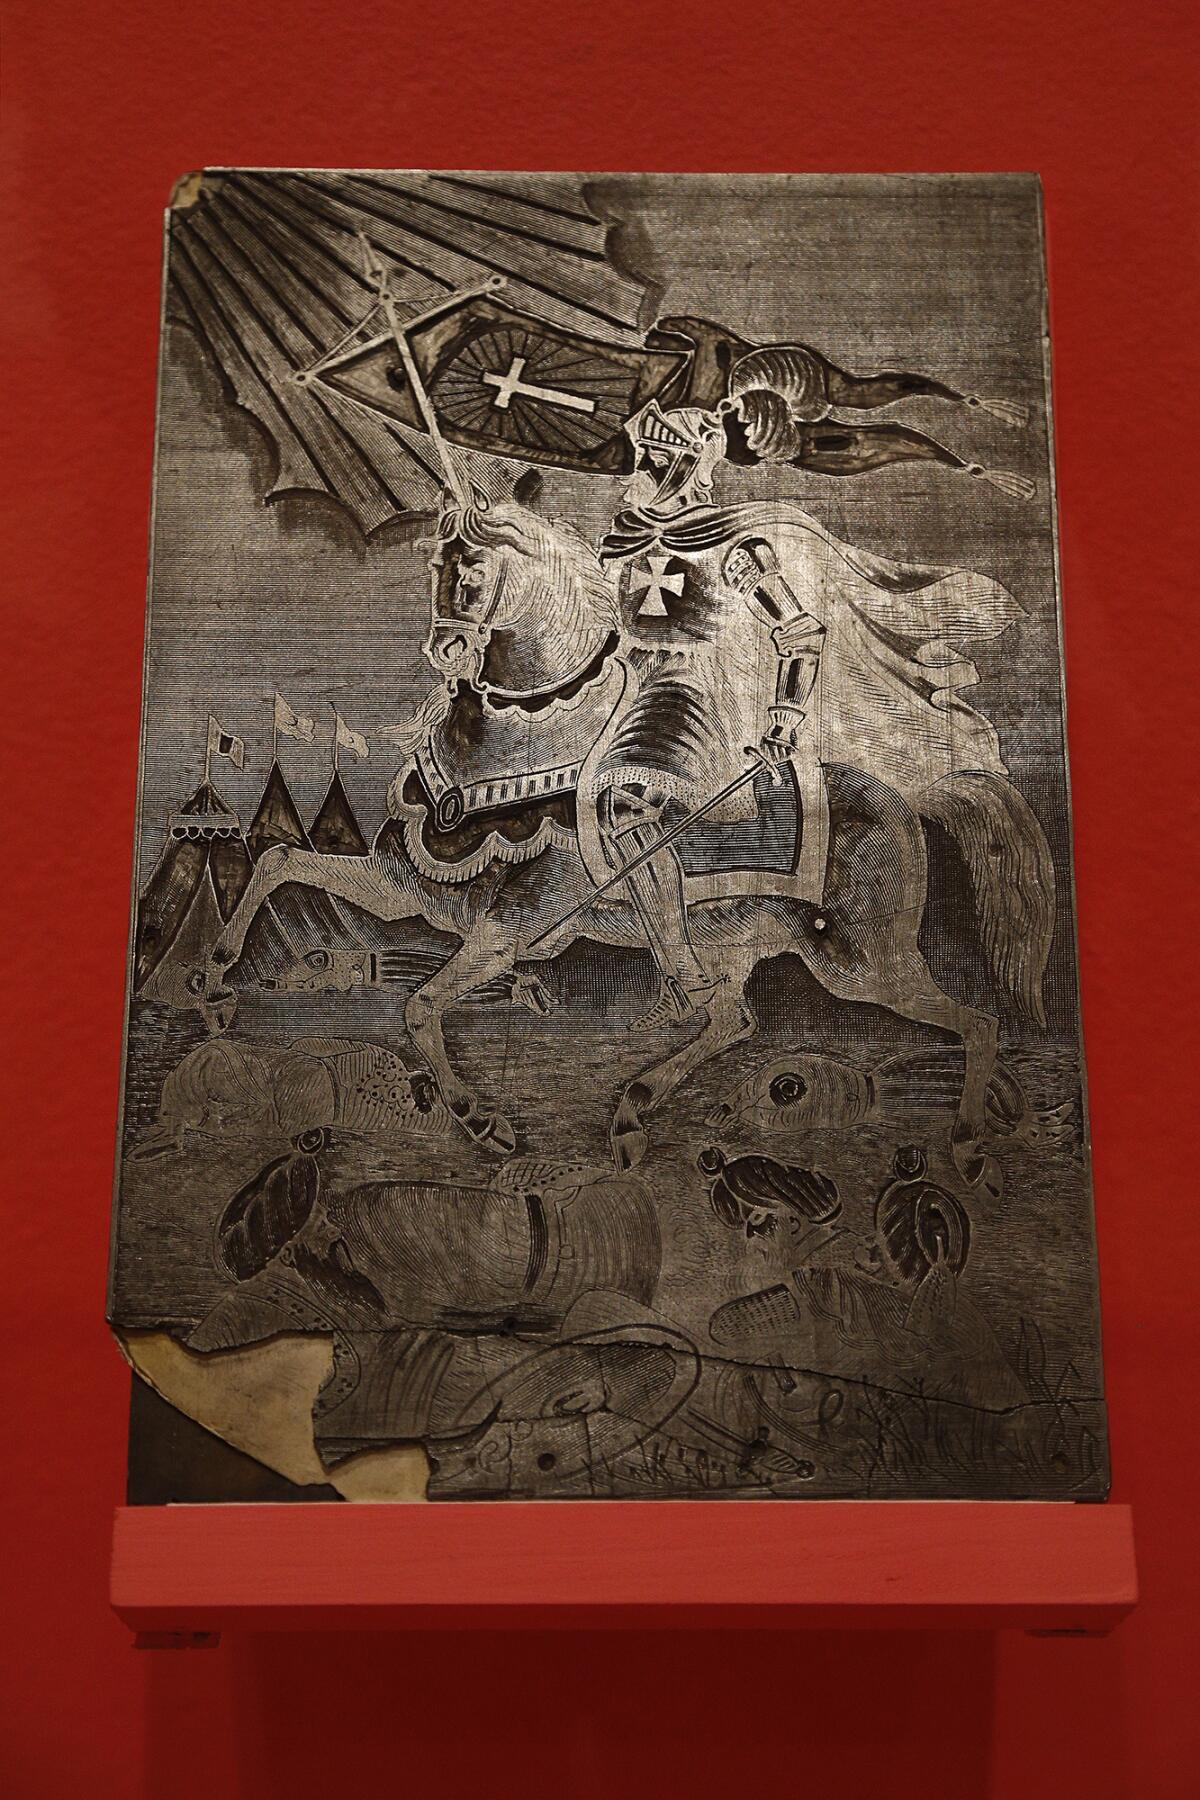 A lead engraving printing plate called "Saint Santiago," dated 1895 by José Guadalupe Posada.